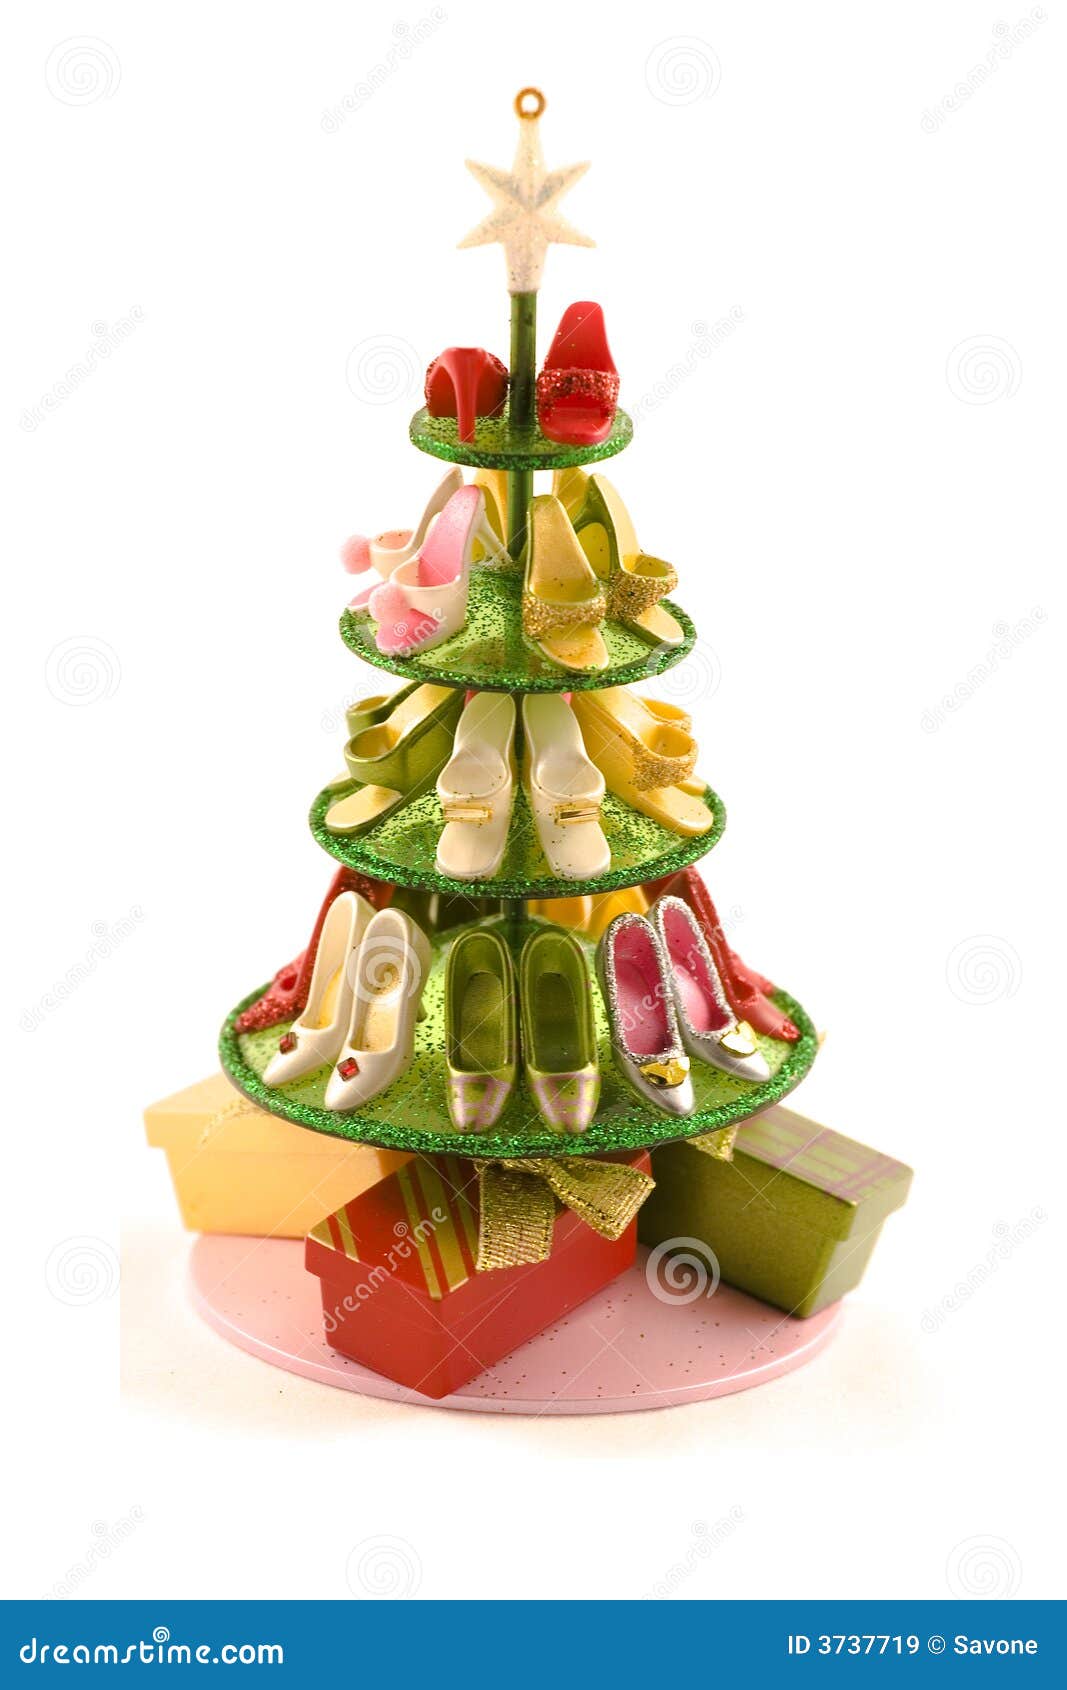 Christmas Tree With Shoes Royalty Free Stock Images - Image: 3737719